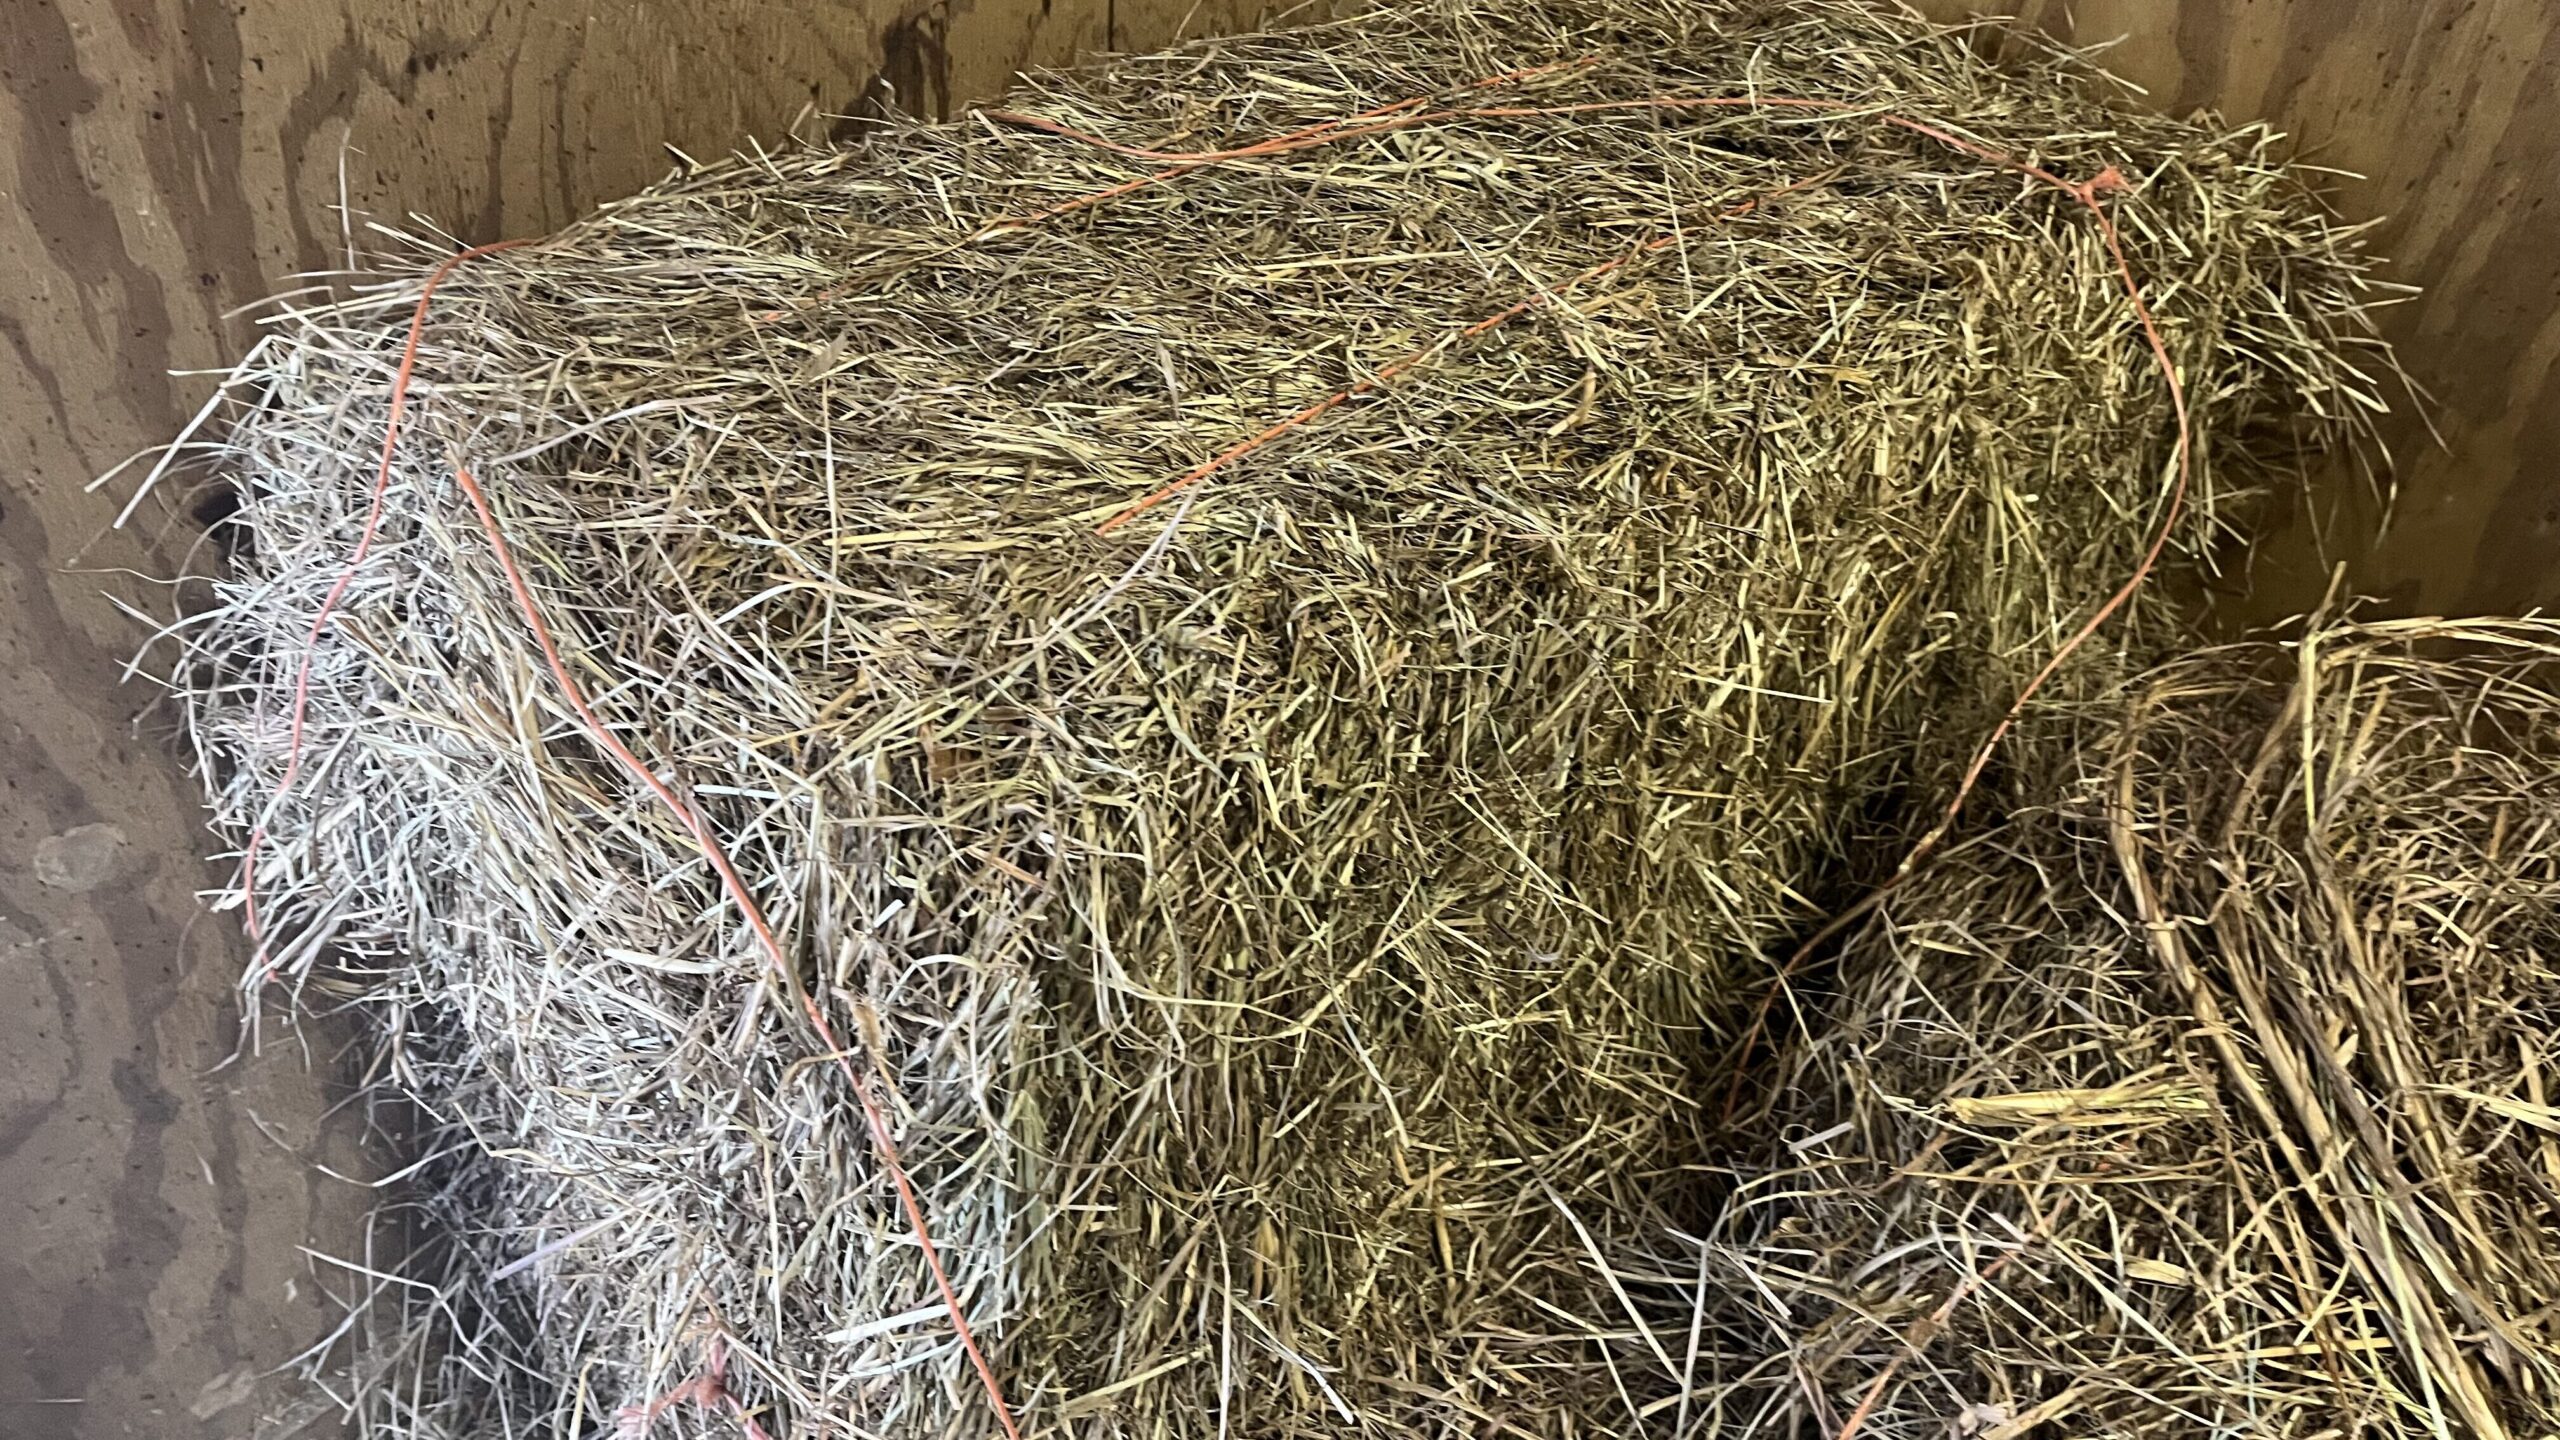 Picture of a bale of bermudagrass hay.